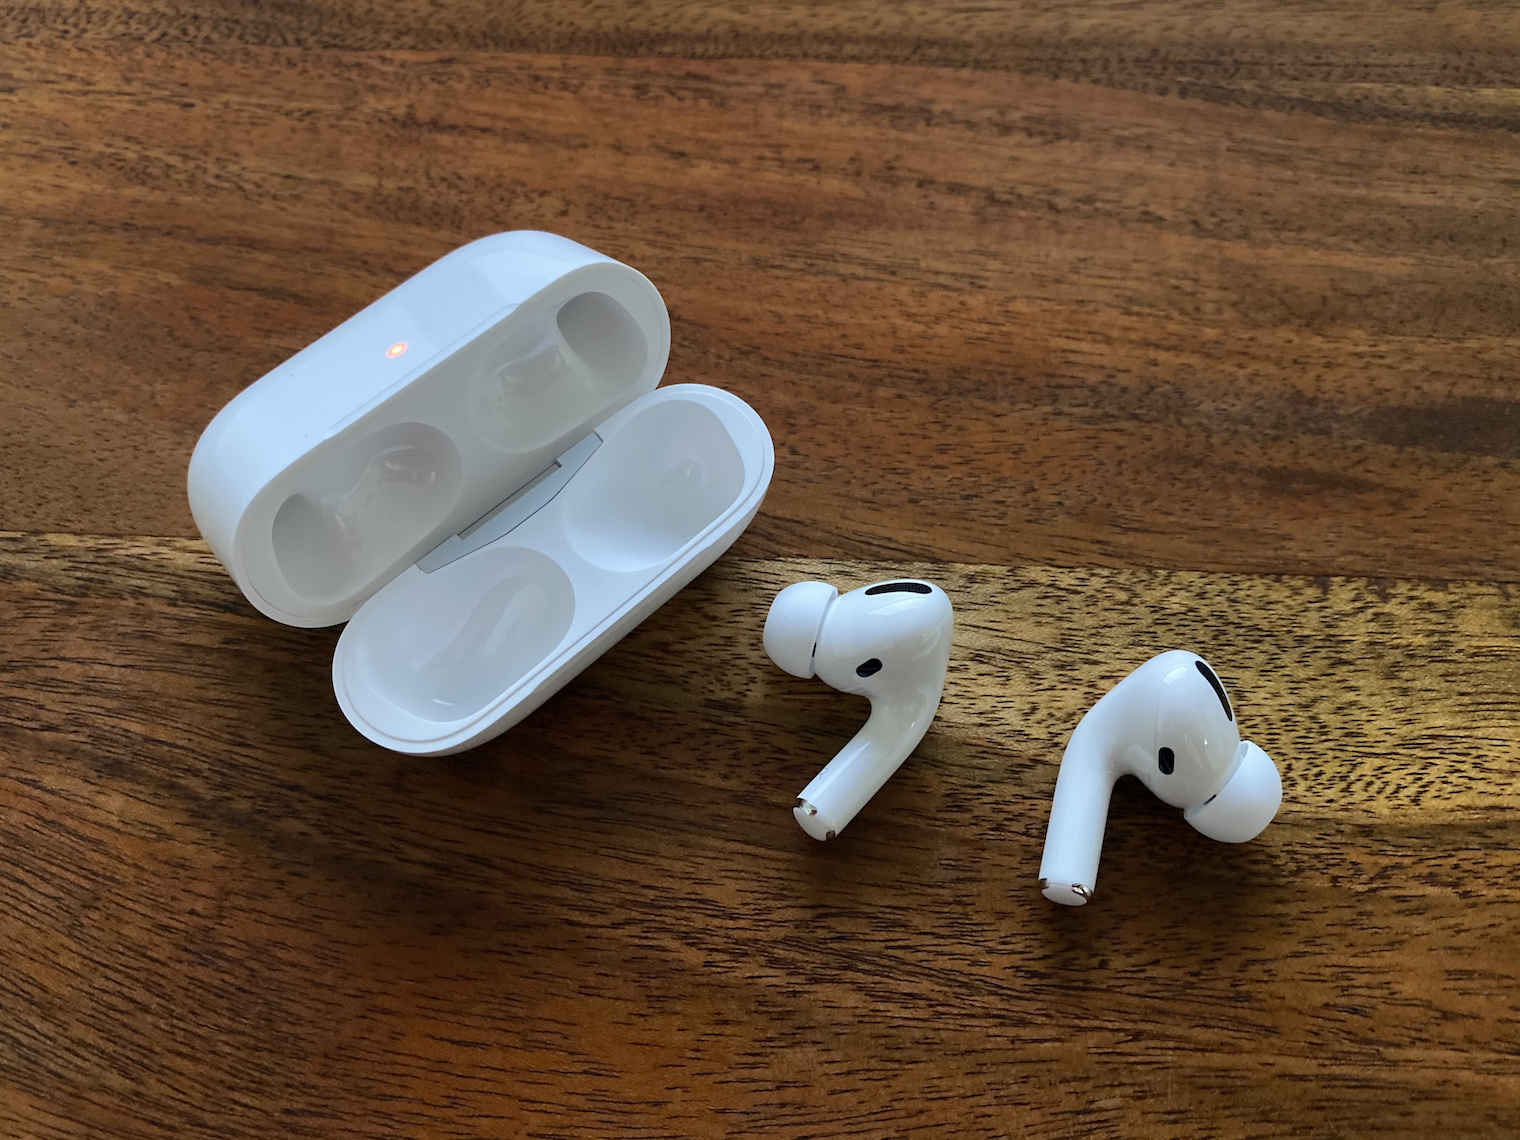 AIRPODS Pro 1st Generation. Левый наушник Apple AIRPODS 1. AIRPODS Pro аналог. AIRPODS Pro engraving.